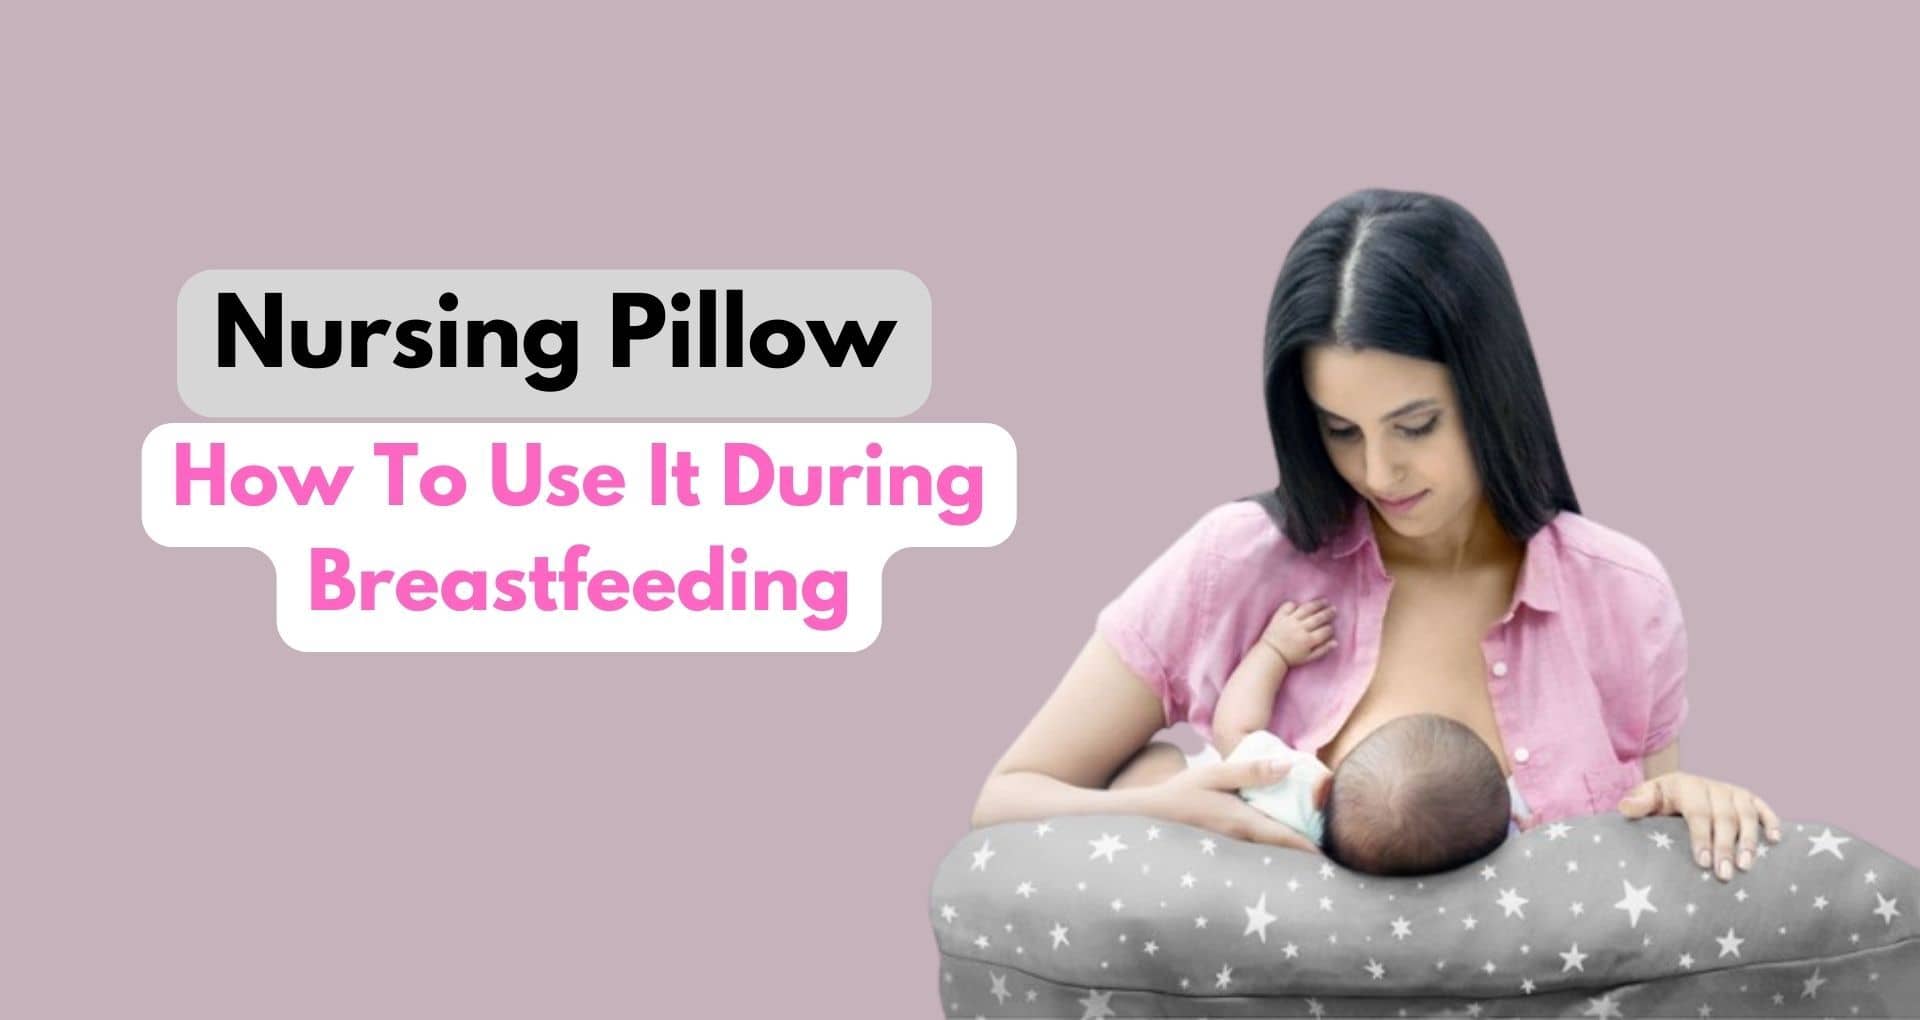 Nursing Pillow How To Use It During Breastfeeding